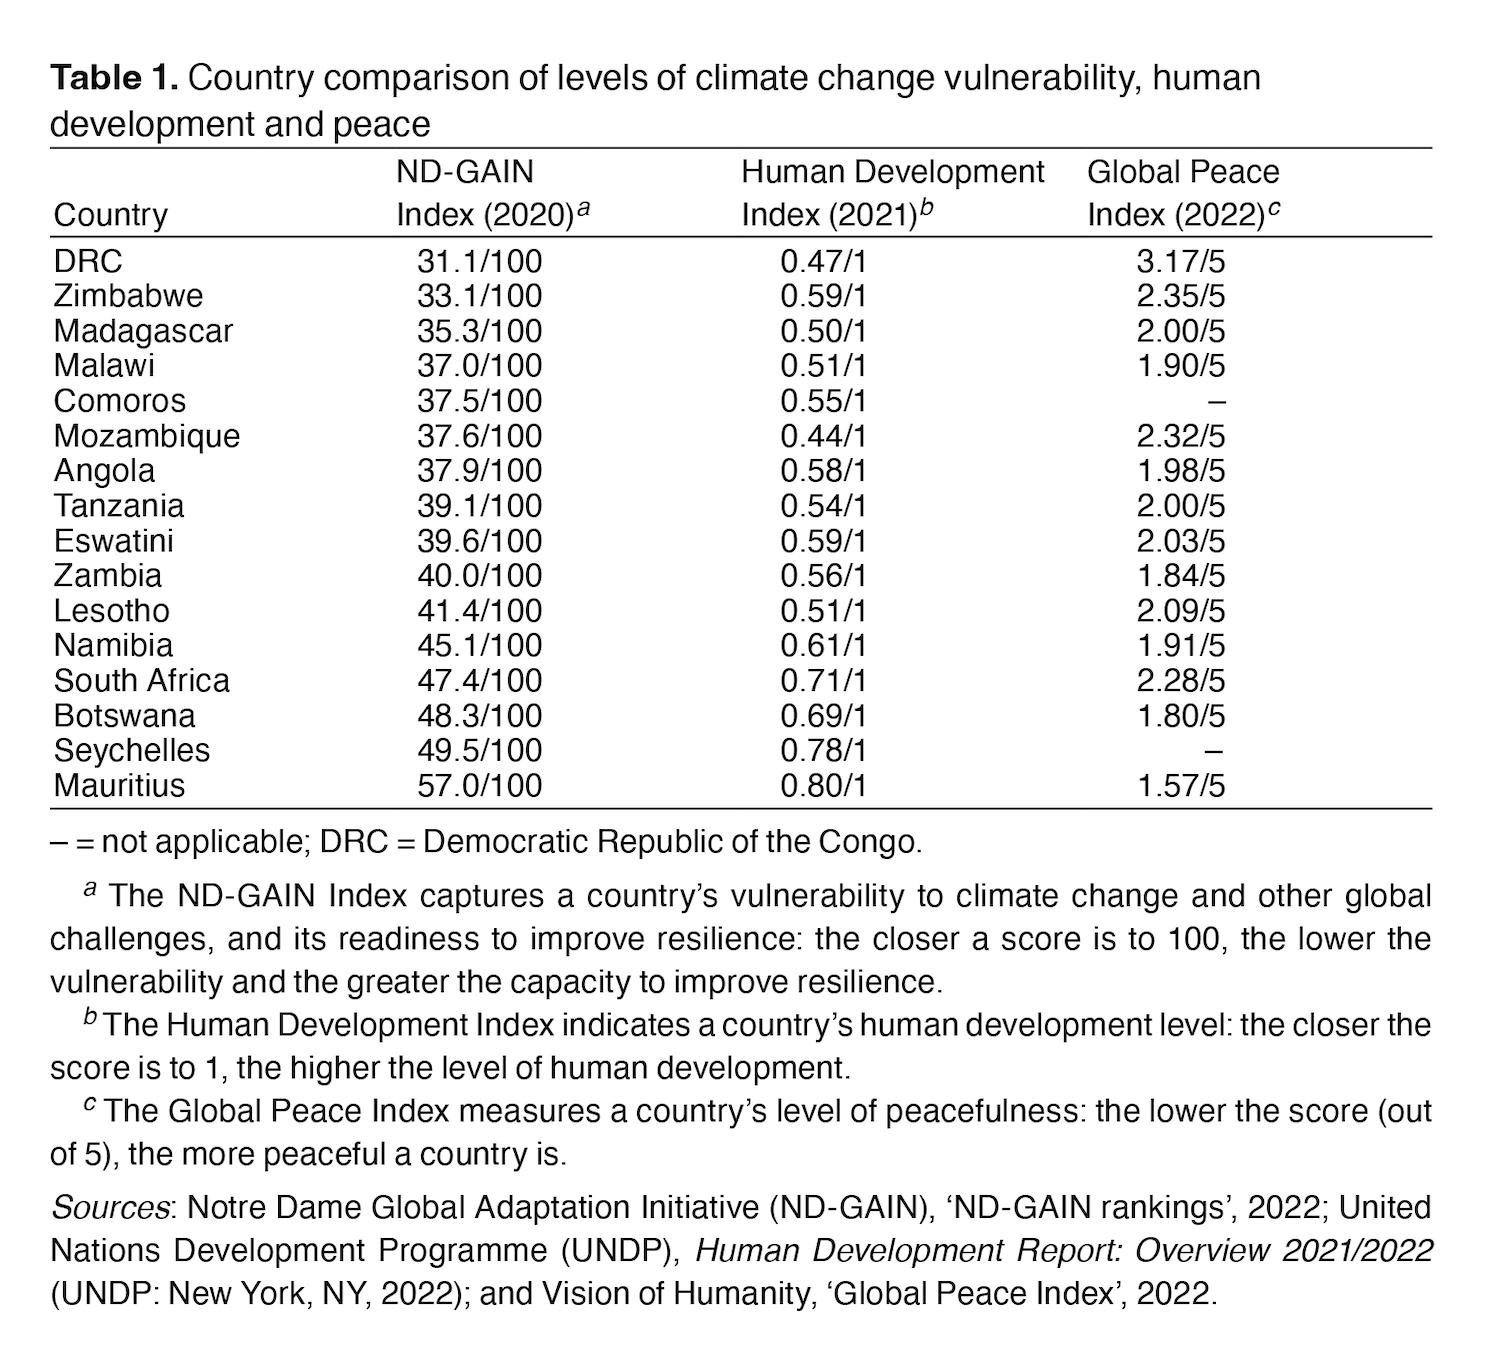 Table 1. Country comparison of climate change vulnerability, human development and peace